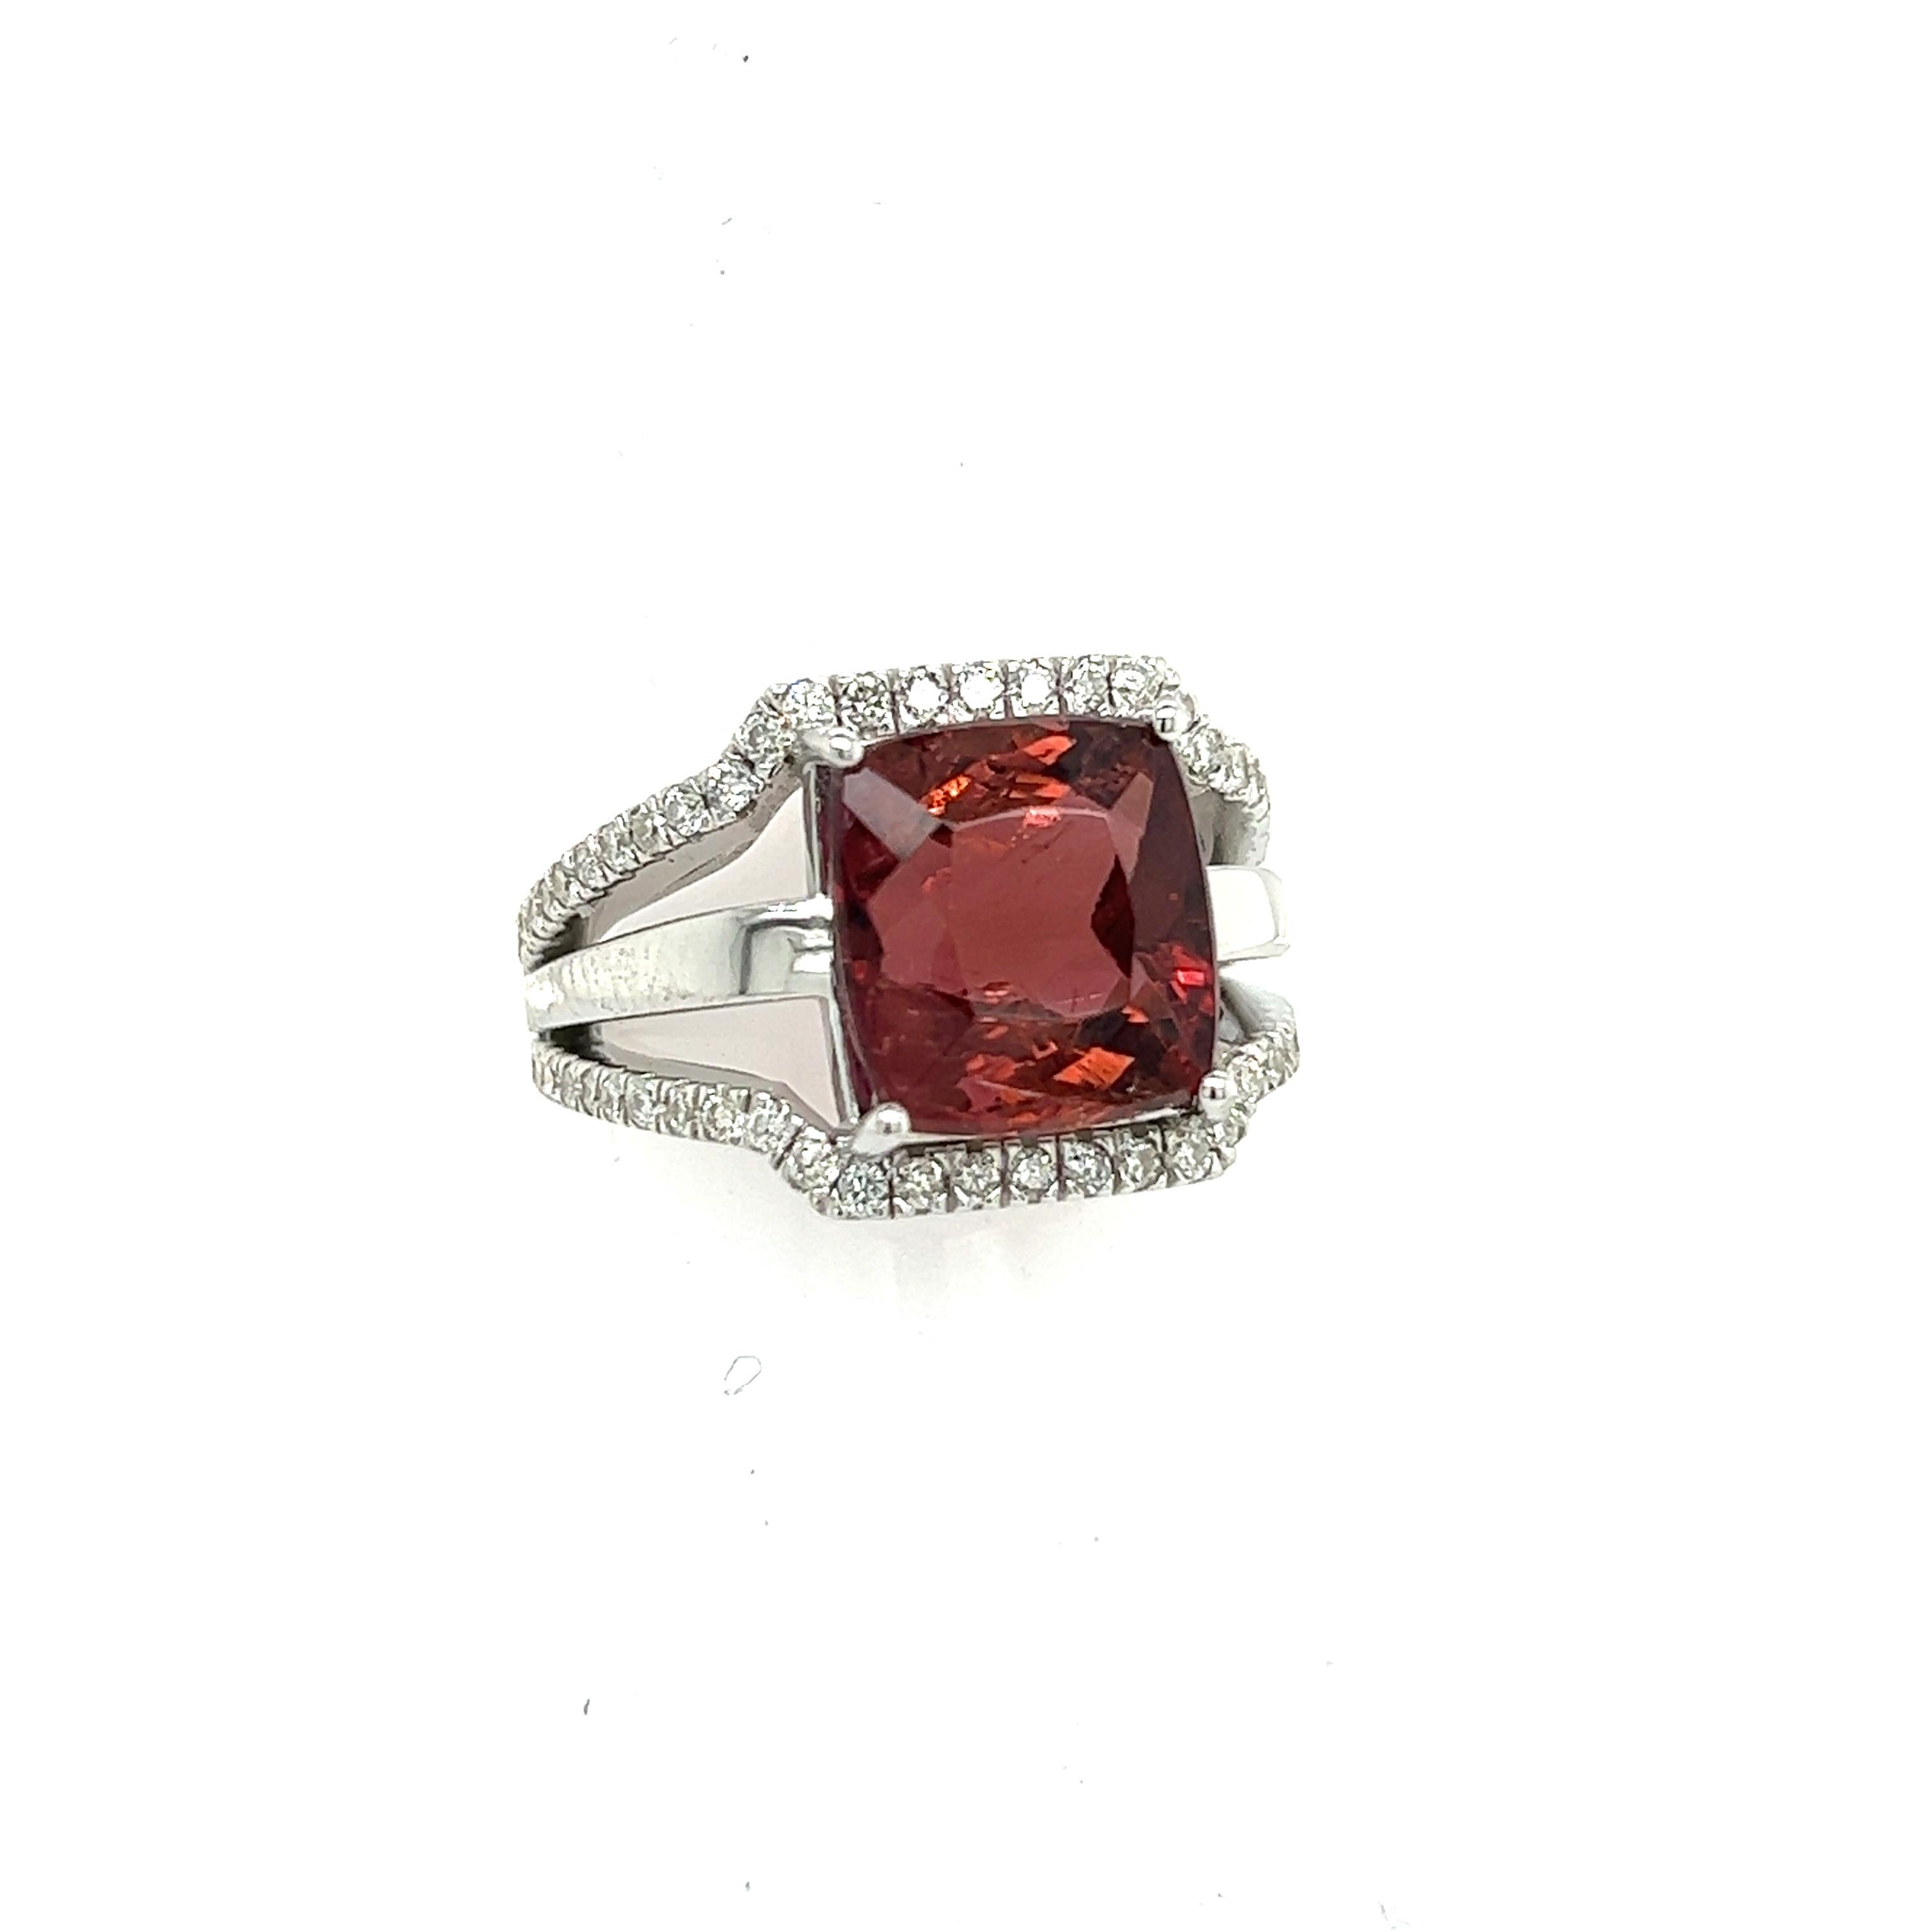 Natural Tourmaline Diamond Ring 6.5 14k White Gold 5.89 TCW Certified For Sale 1